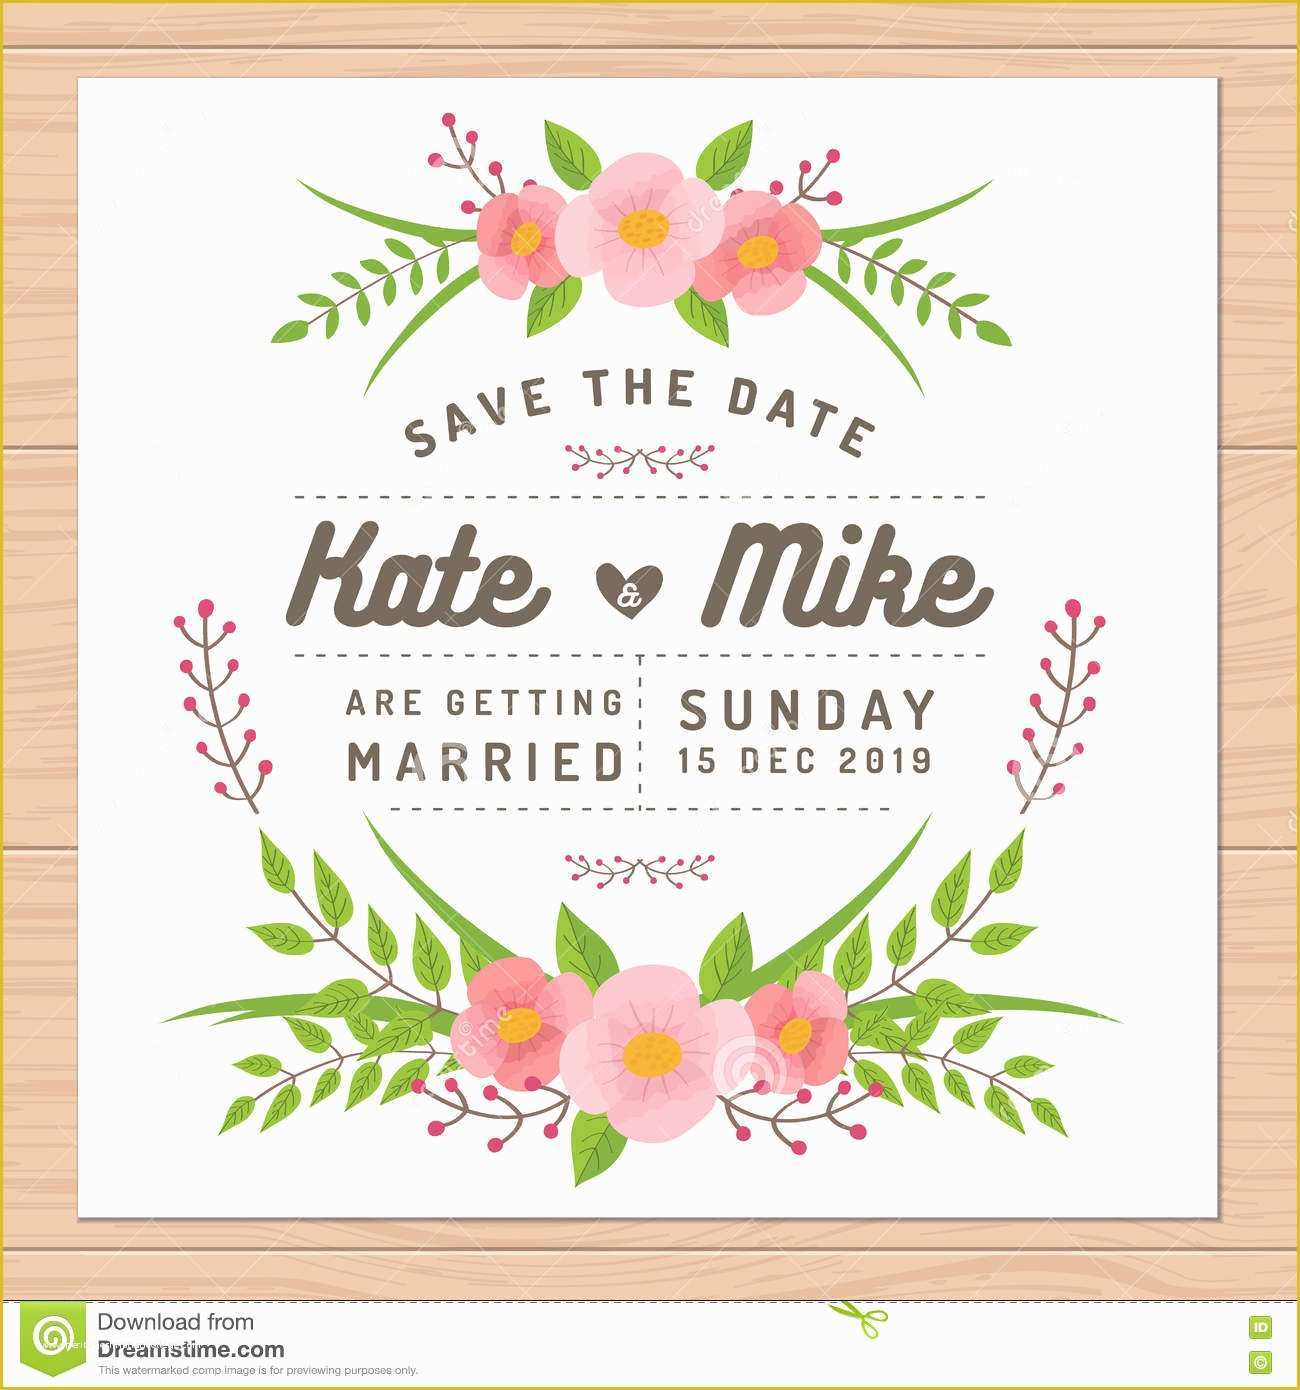 Save the Date Invitation Templates Free Of Save the Date Wedding Invitation Card with Flower